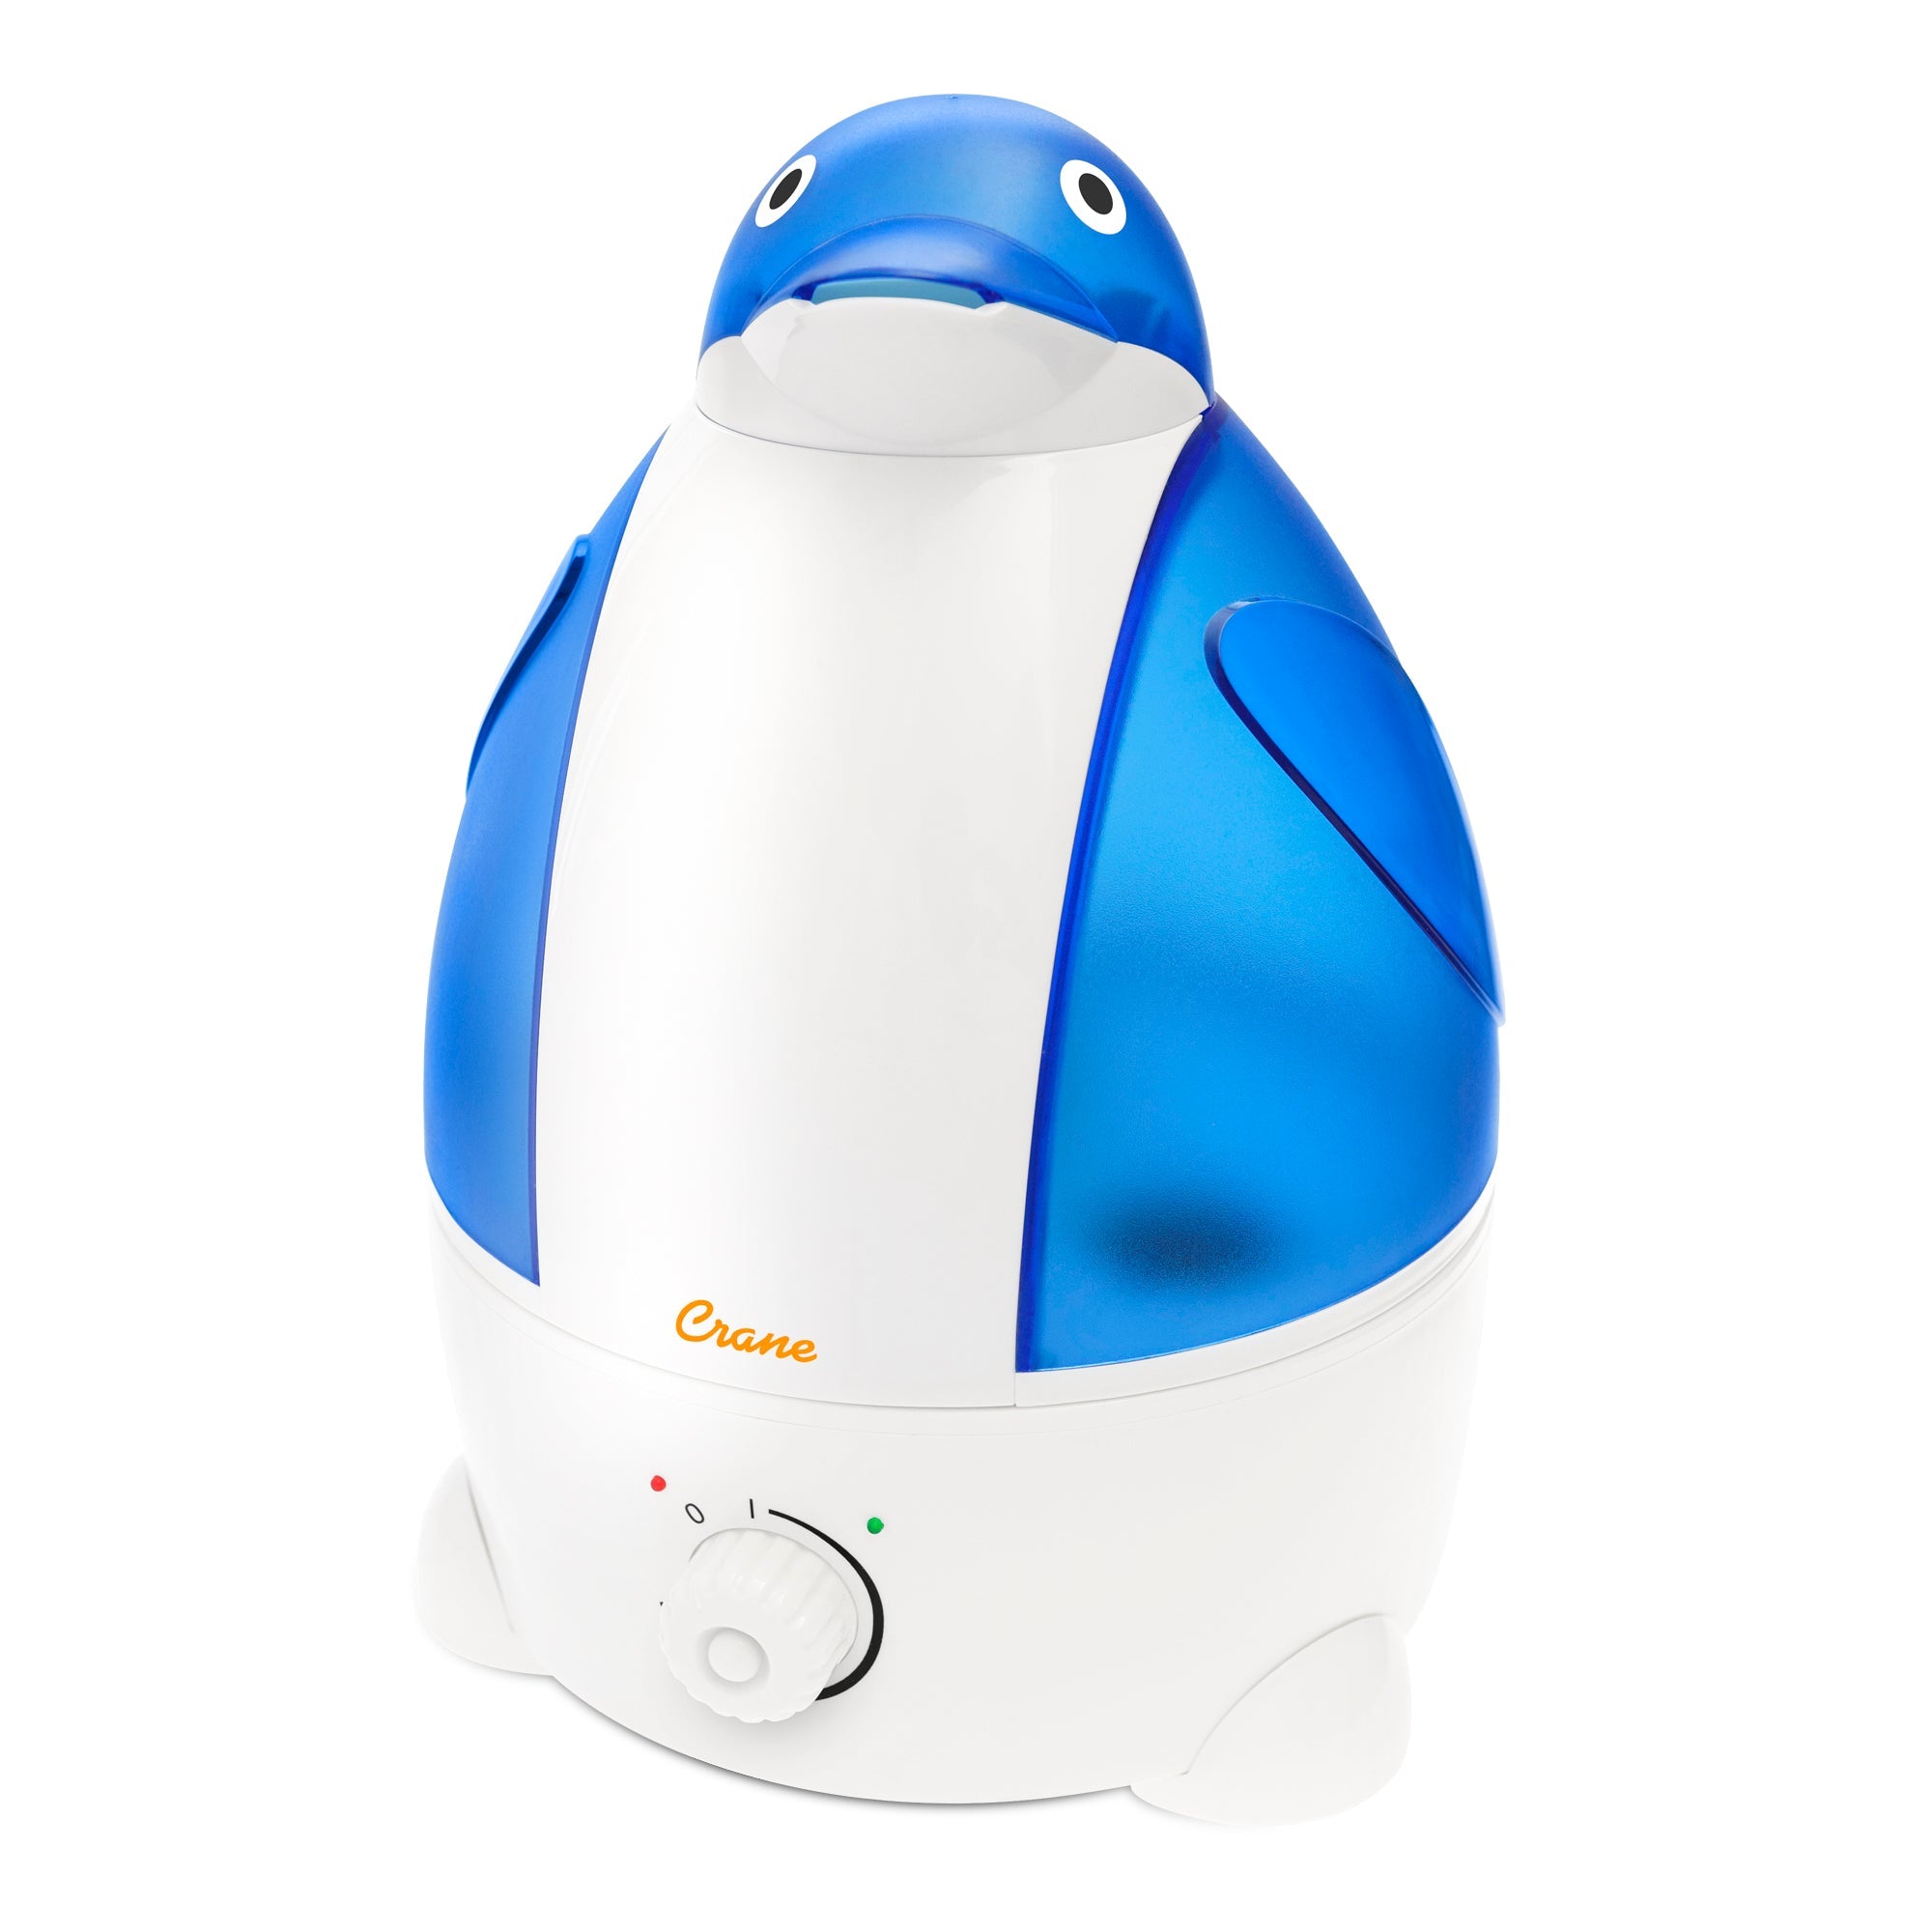 Crane RB-0865 Adorable Ultrasonic Cool Mist Humidifier -  Certified Refurbished